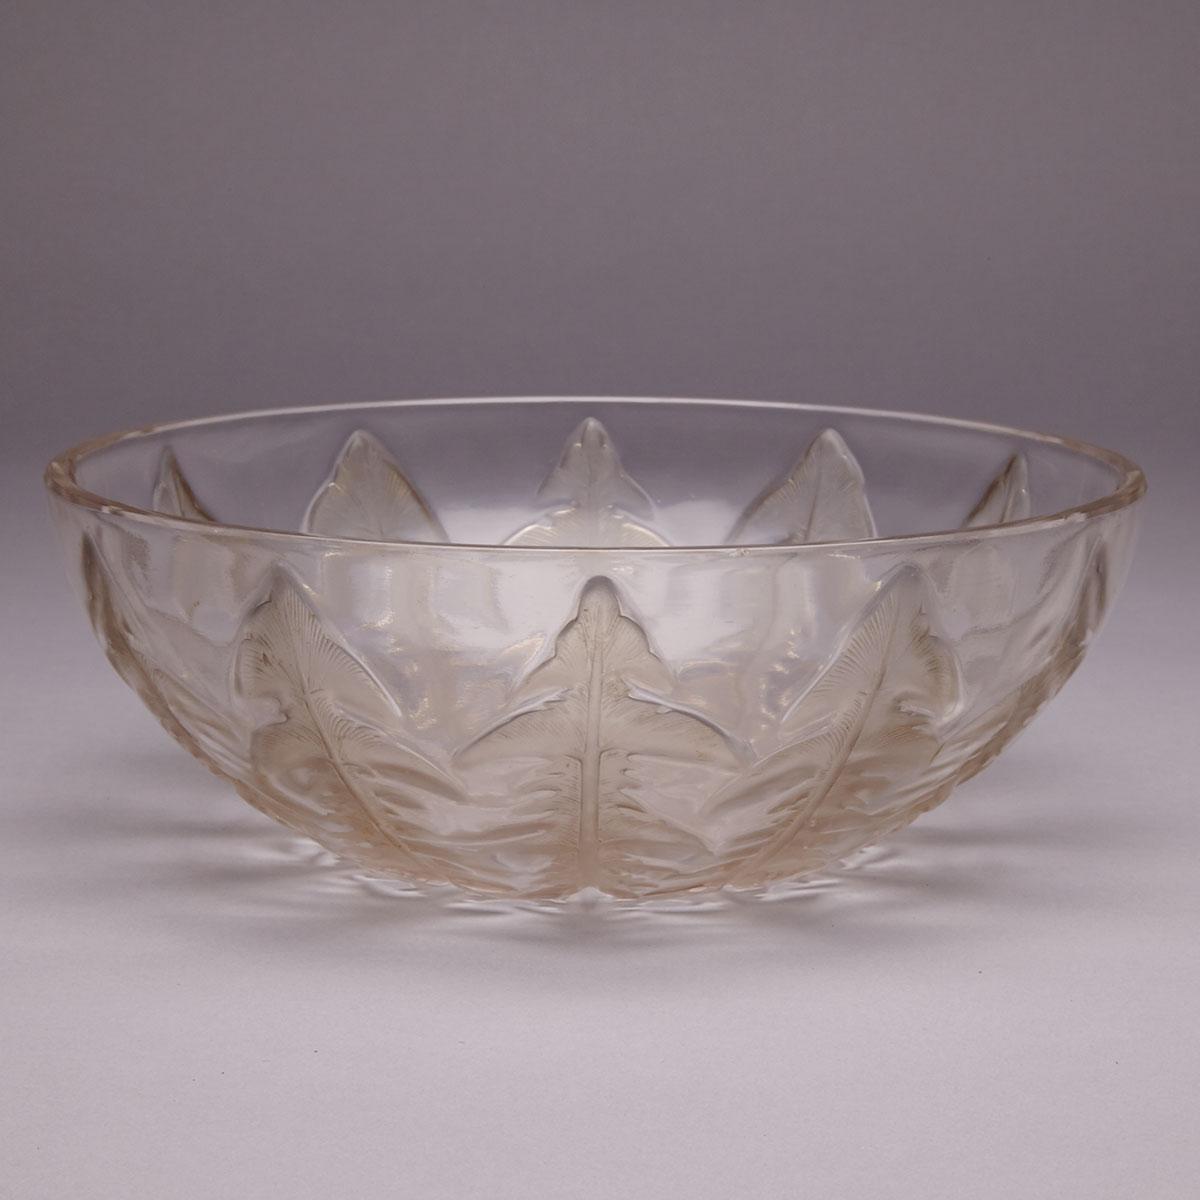 ‘Pissenlit’,  Lalique Moulded and Partly Frosted Glass Bowl, c.1930